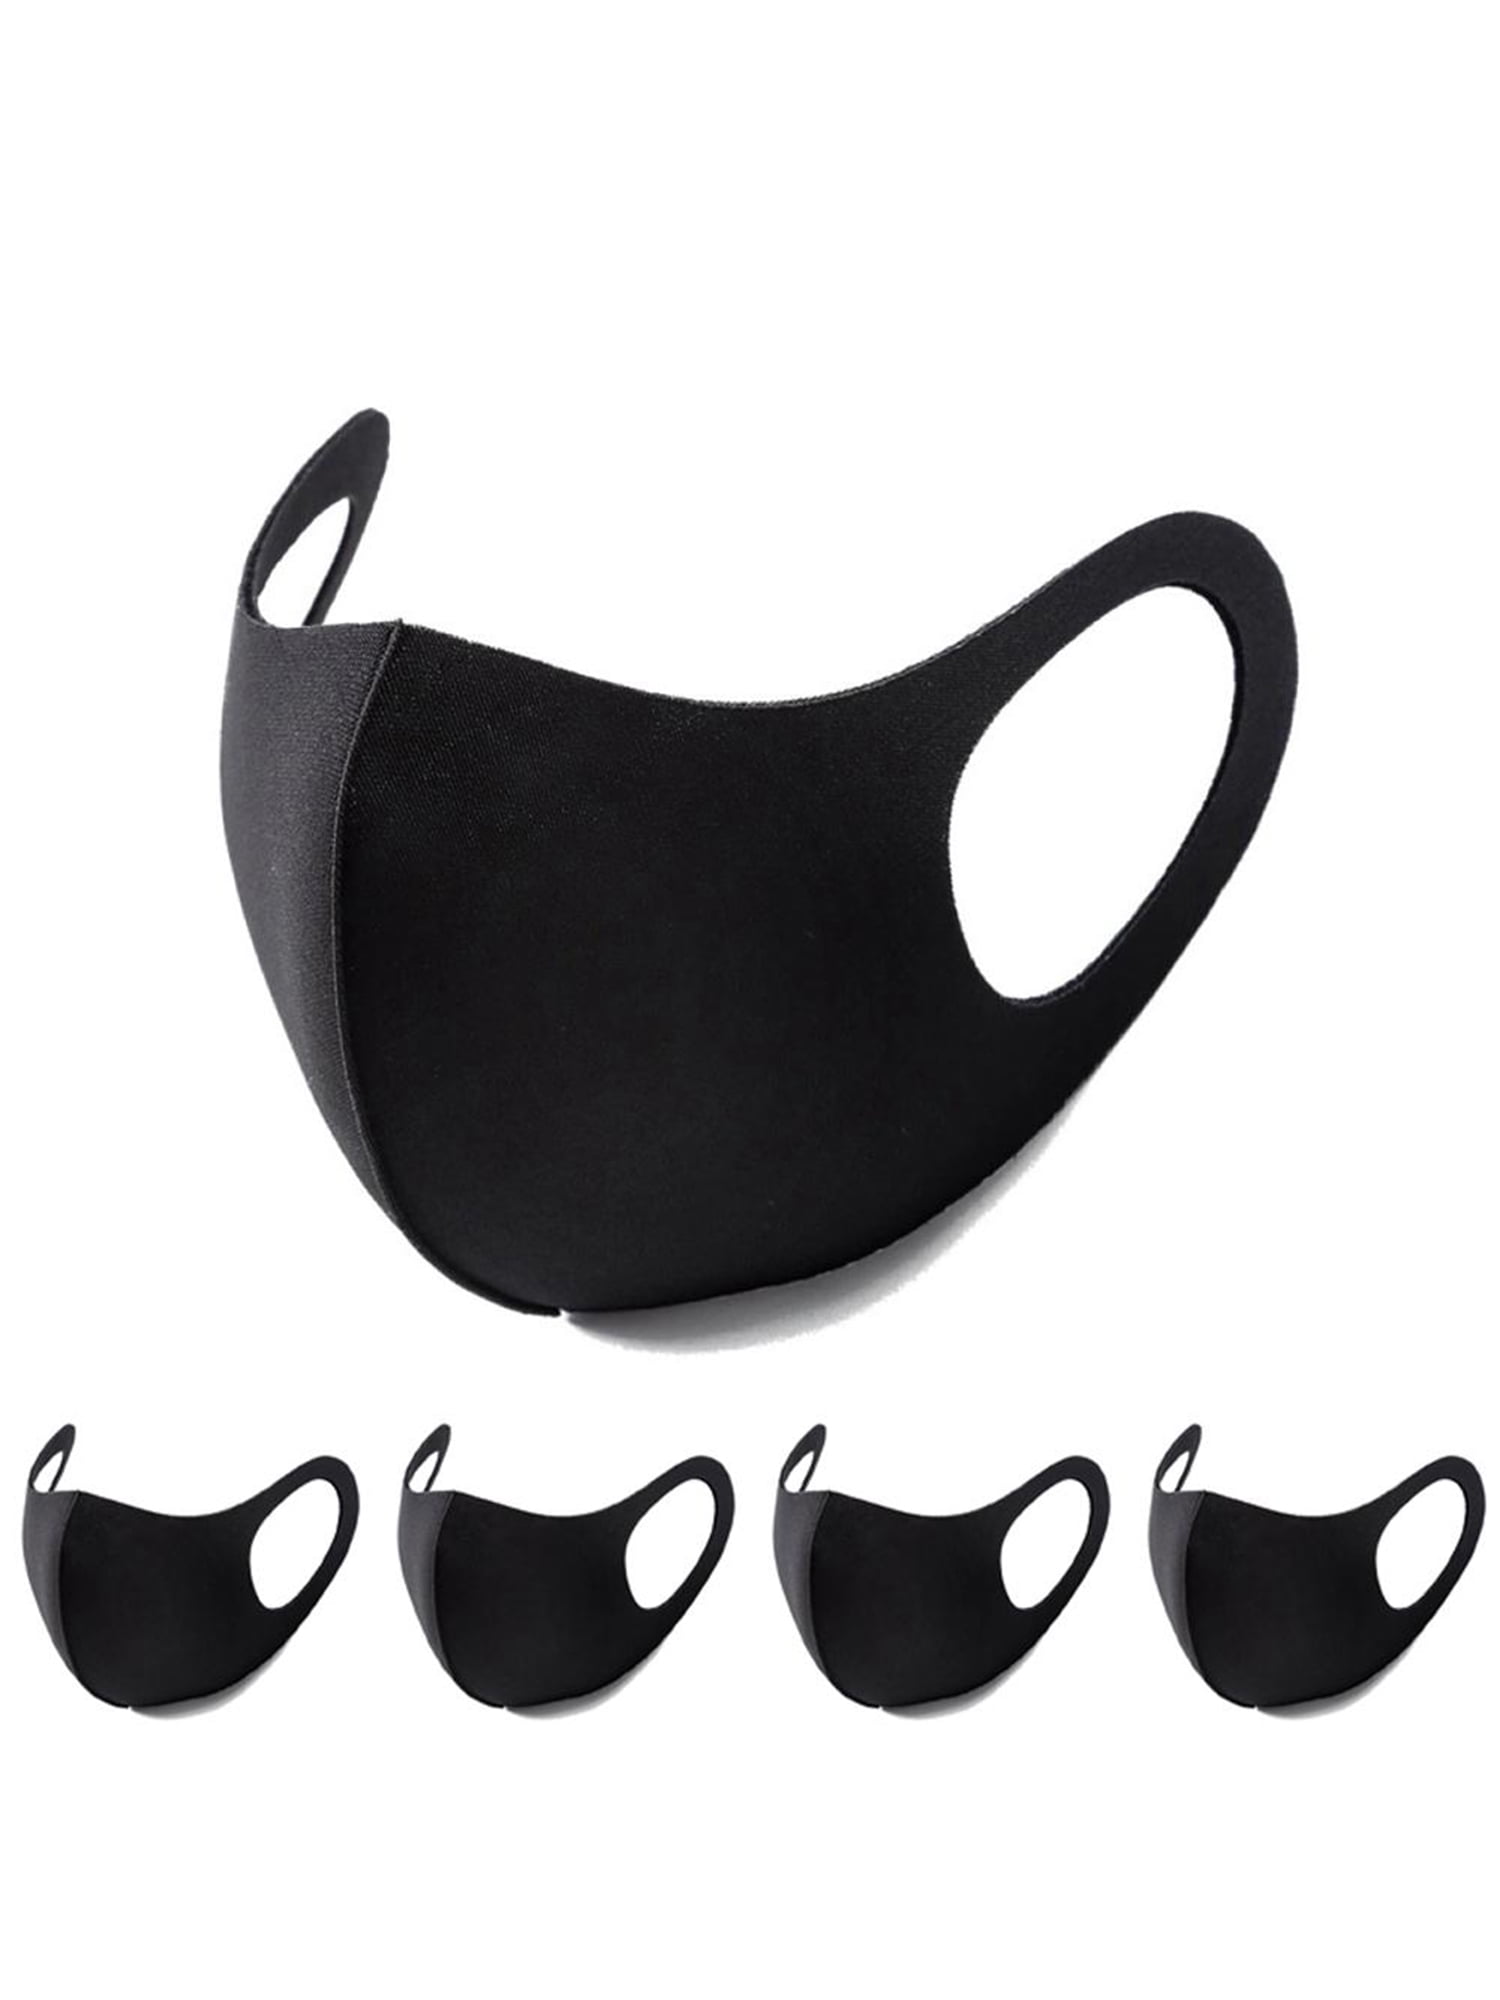 5pcs Mouth Cover Unisex Reusable Face Shield Breathable Cotton Dust Proof Windproof Cloth Mouths Covers for Outdoor Cycling Camping Travel 